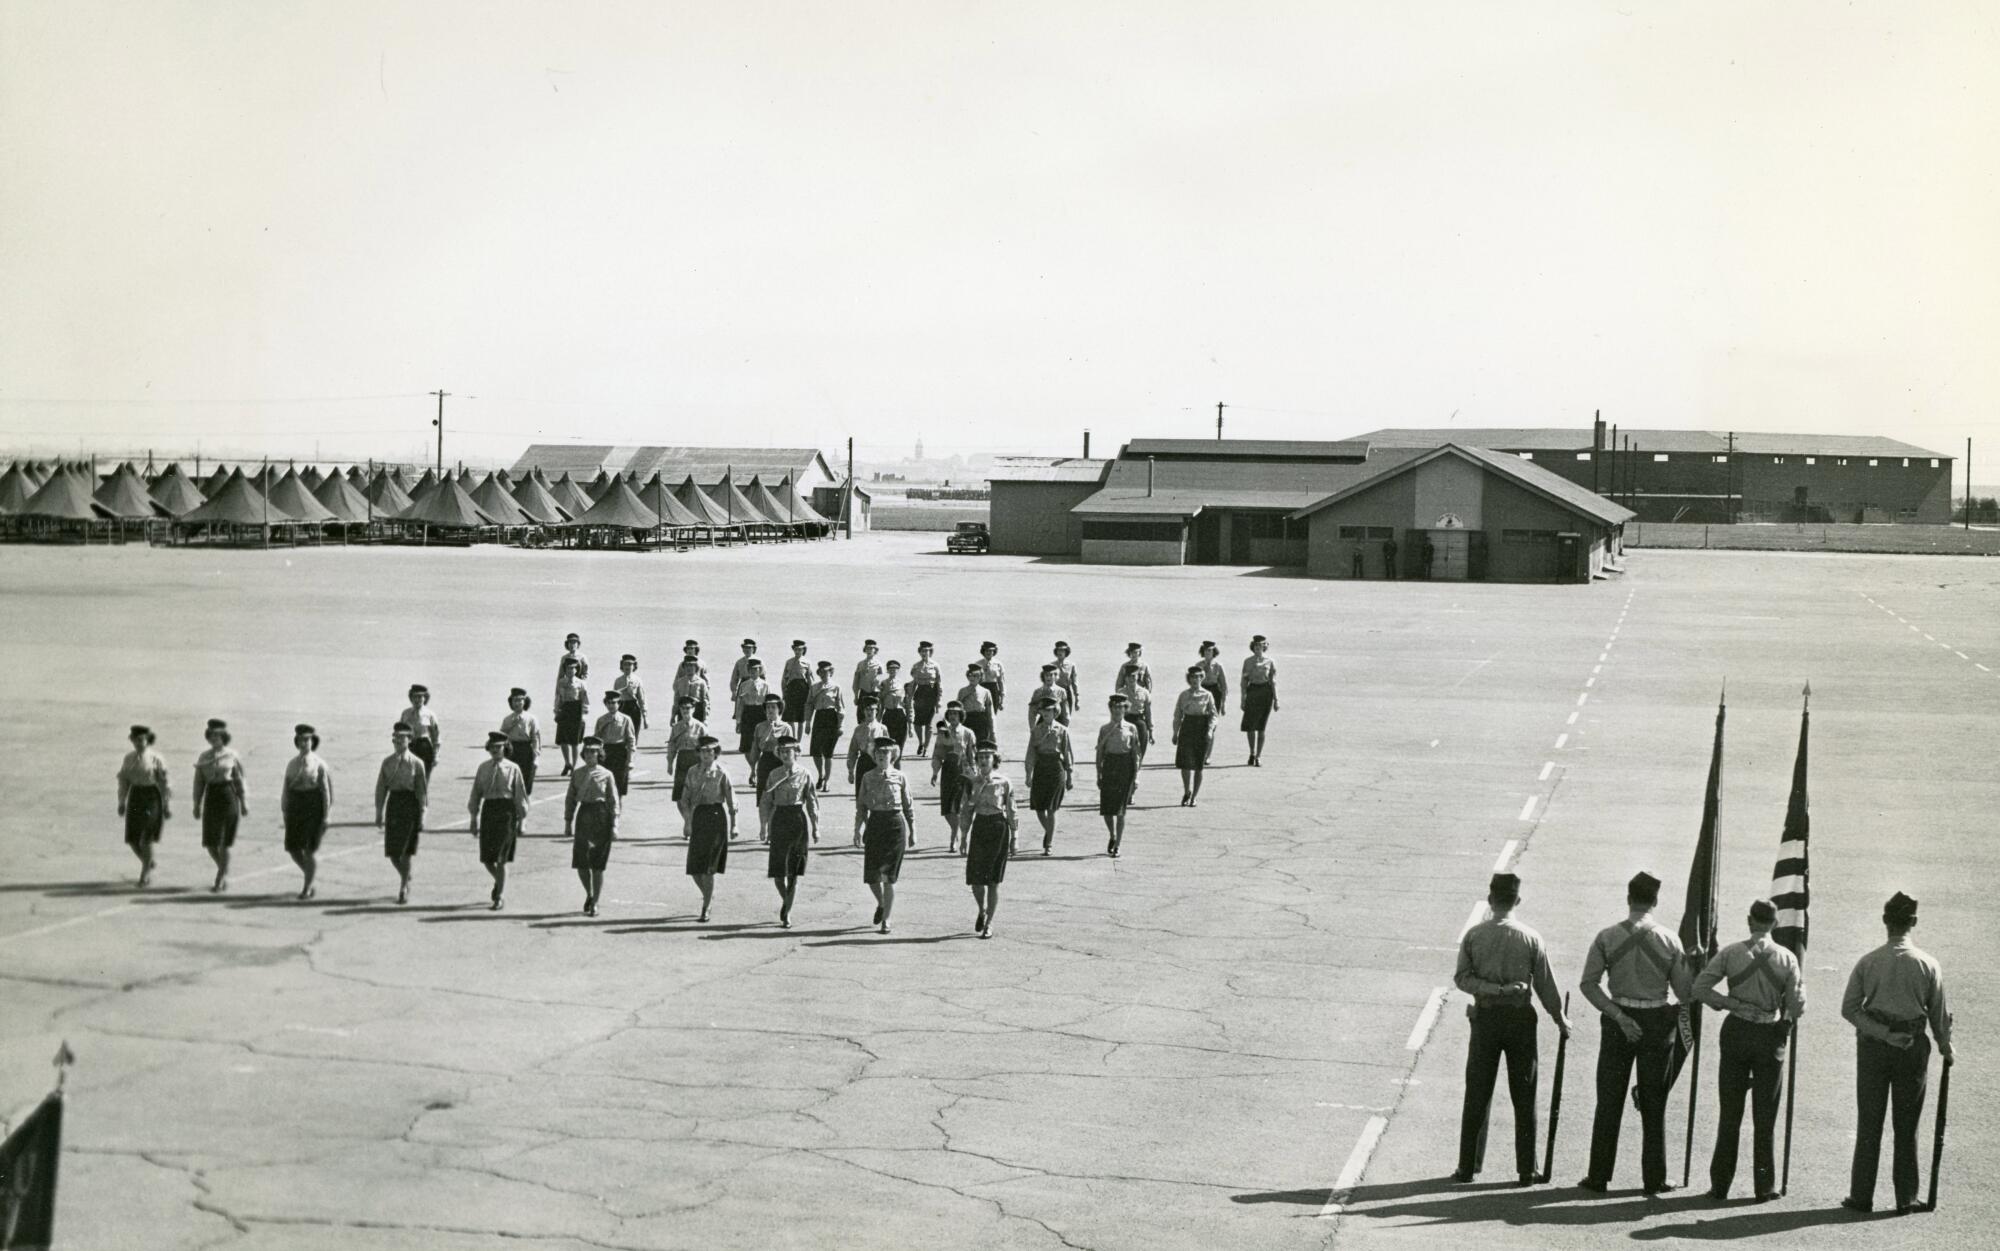 Female Marines march in formation on the parade ground at the Marine Corps Recruit Depot